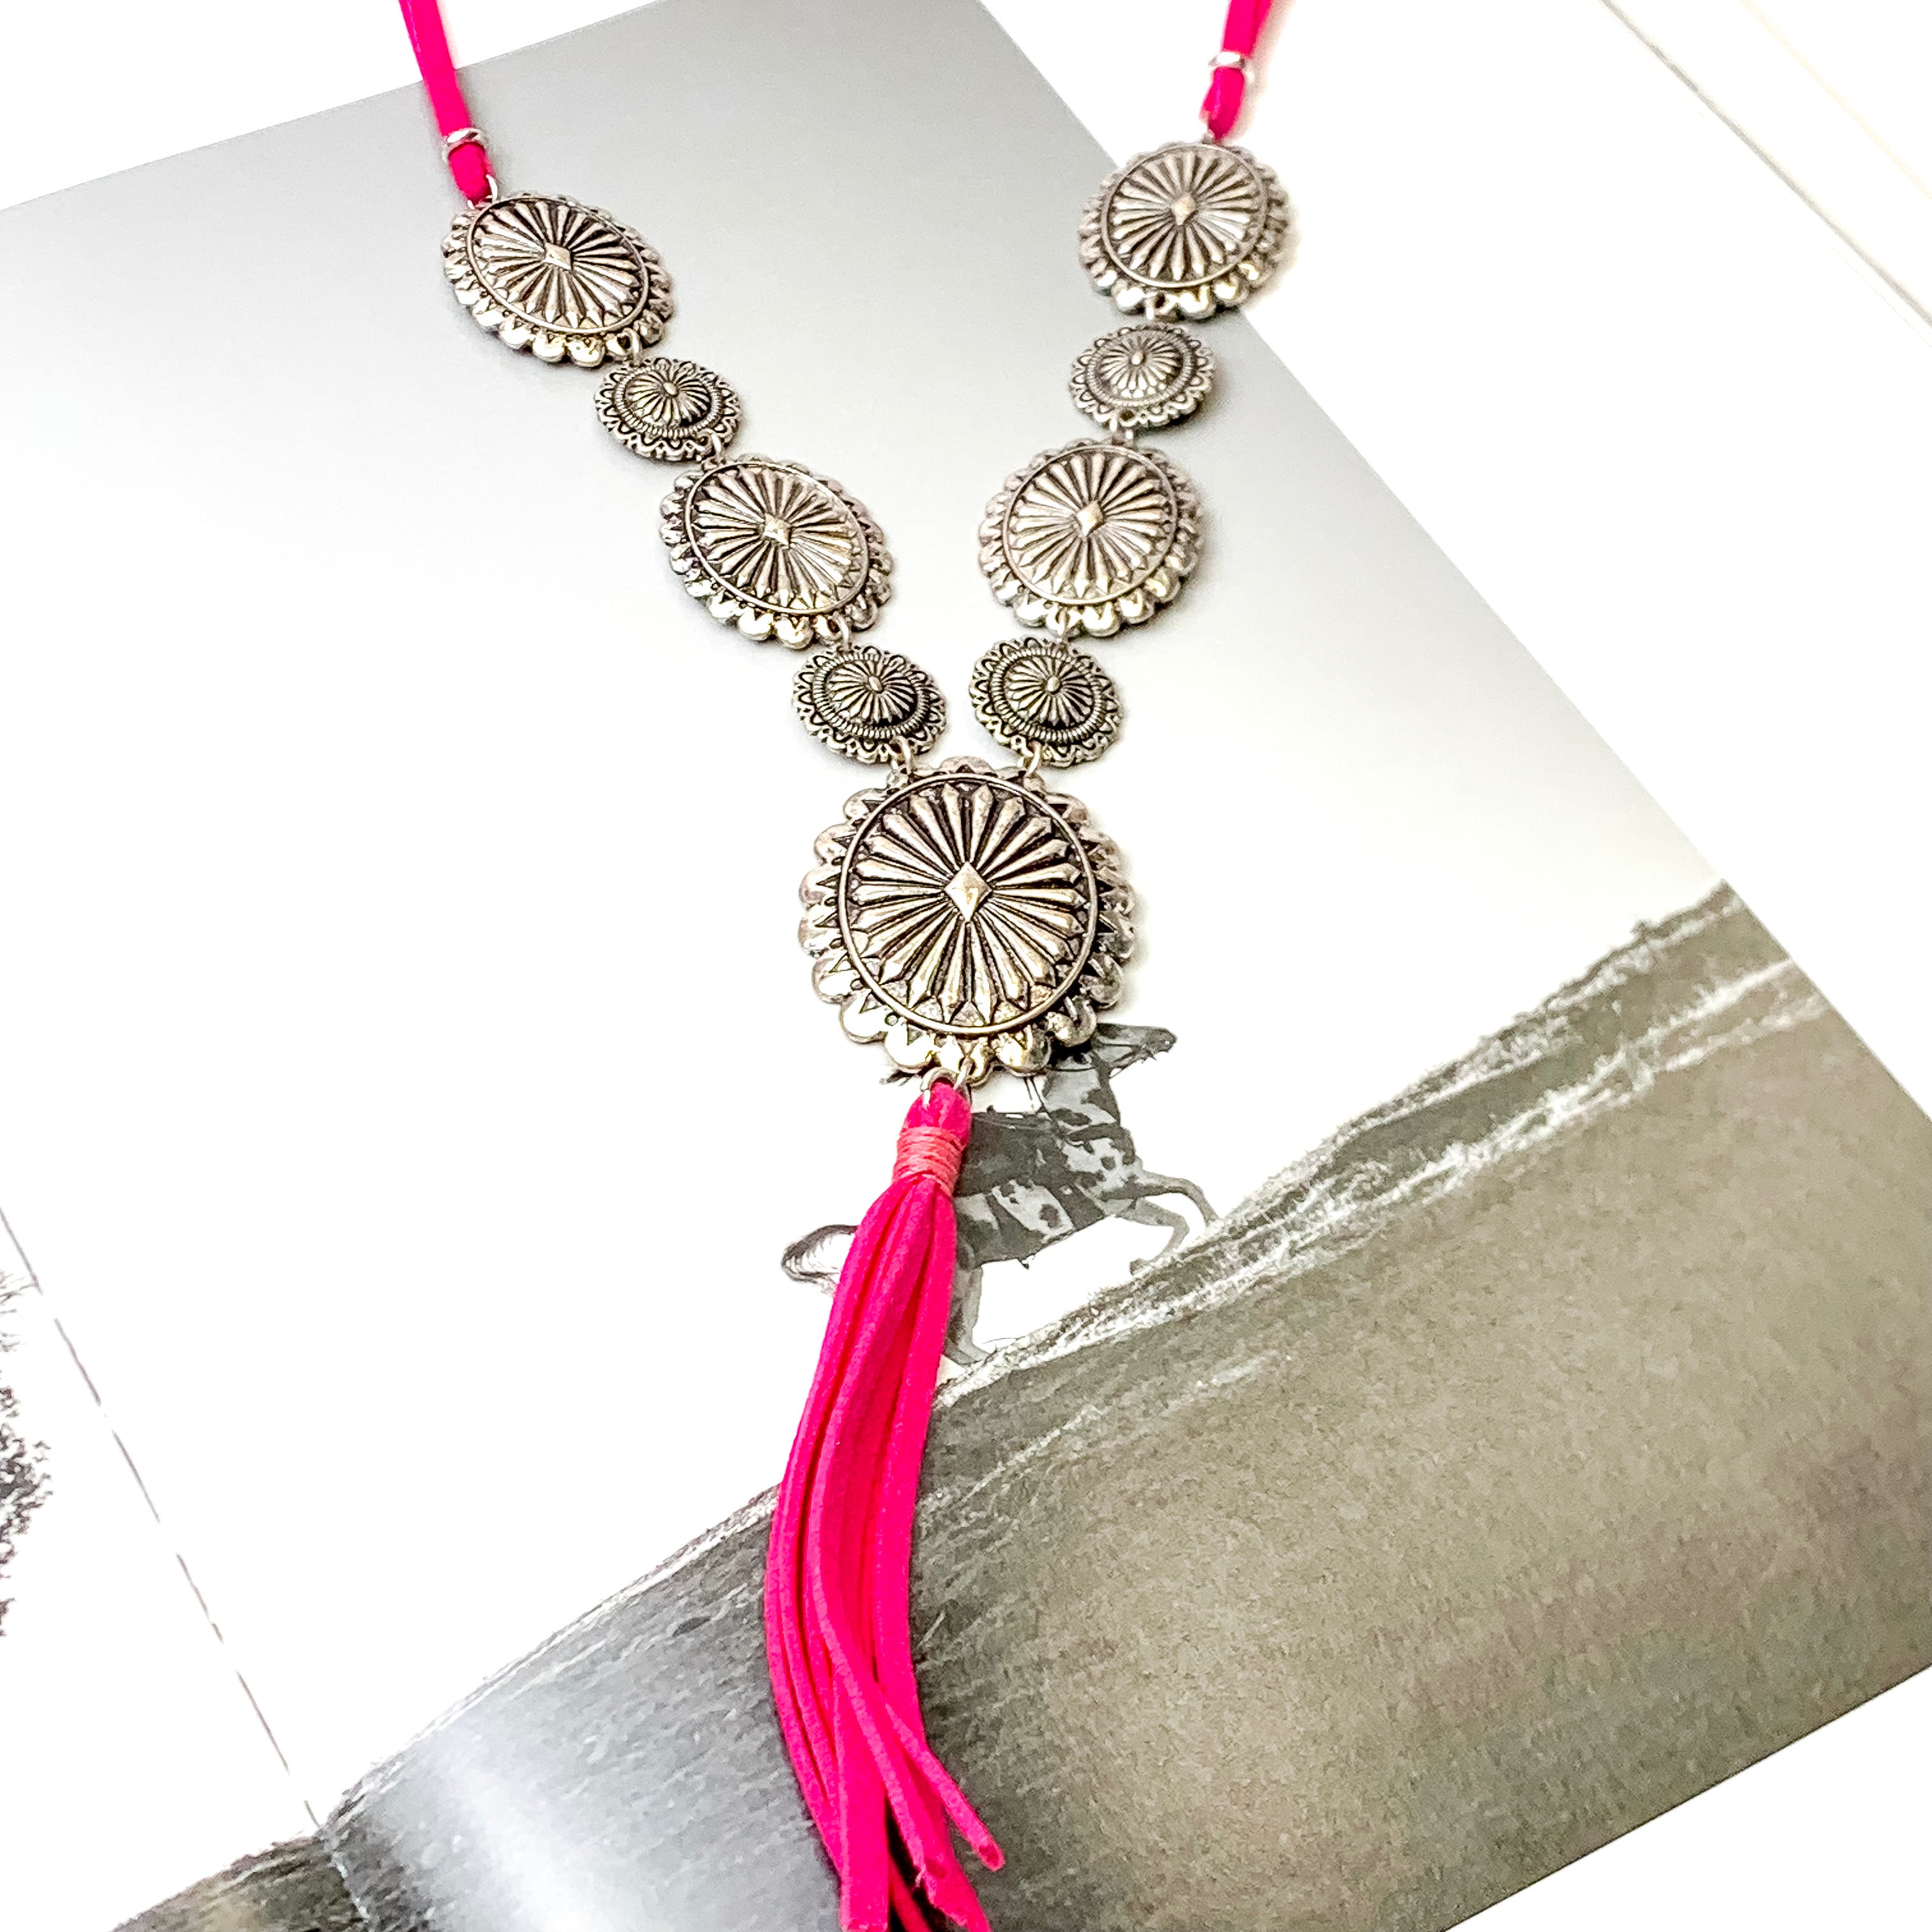 Southern Sweetheart Necklace in Fuchsia Pink - Giddy Up Glamour Boutique